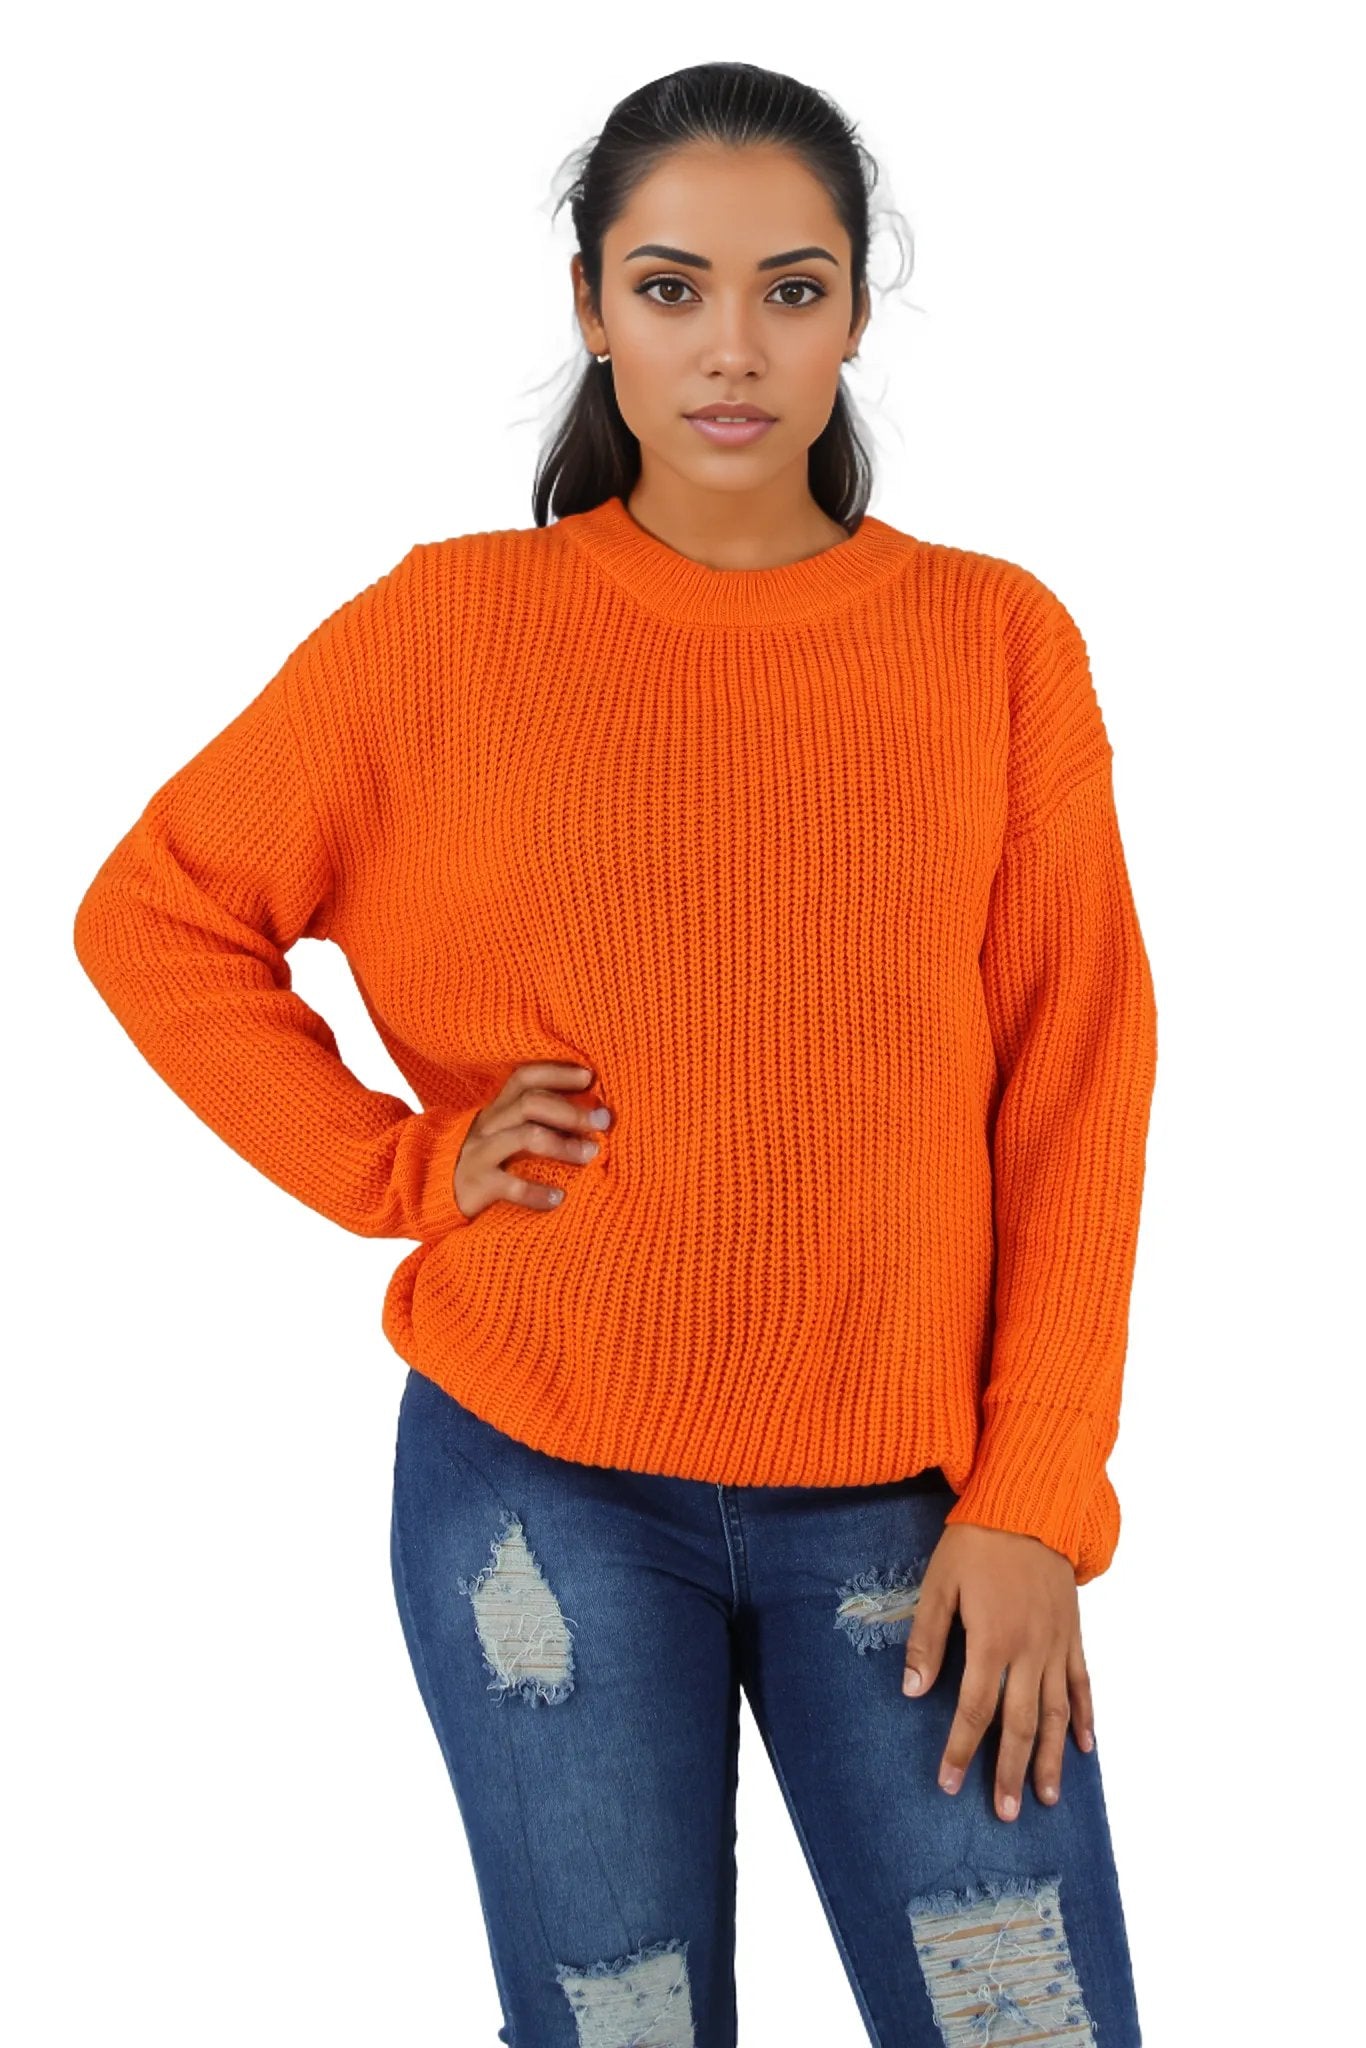 Wool Knitted Long Sleeve Pullover Jersey